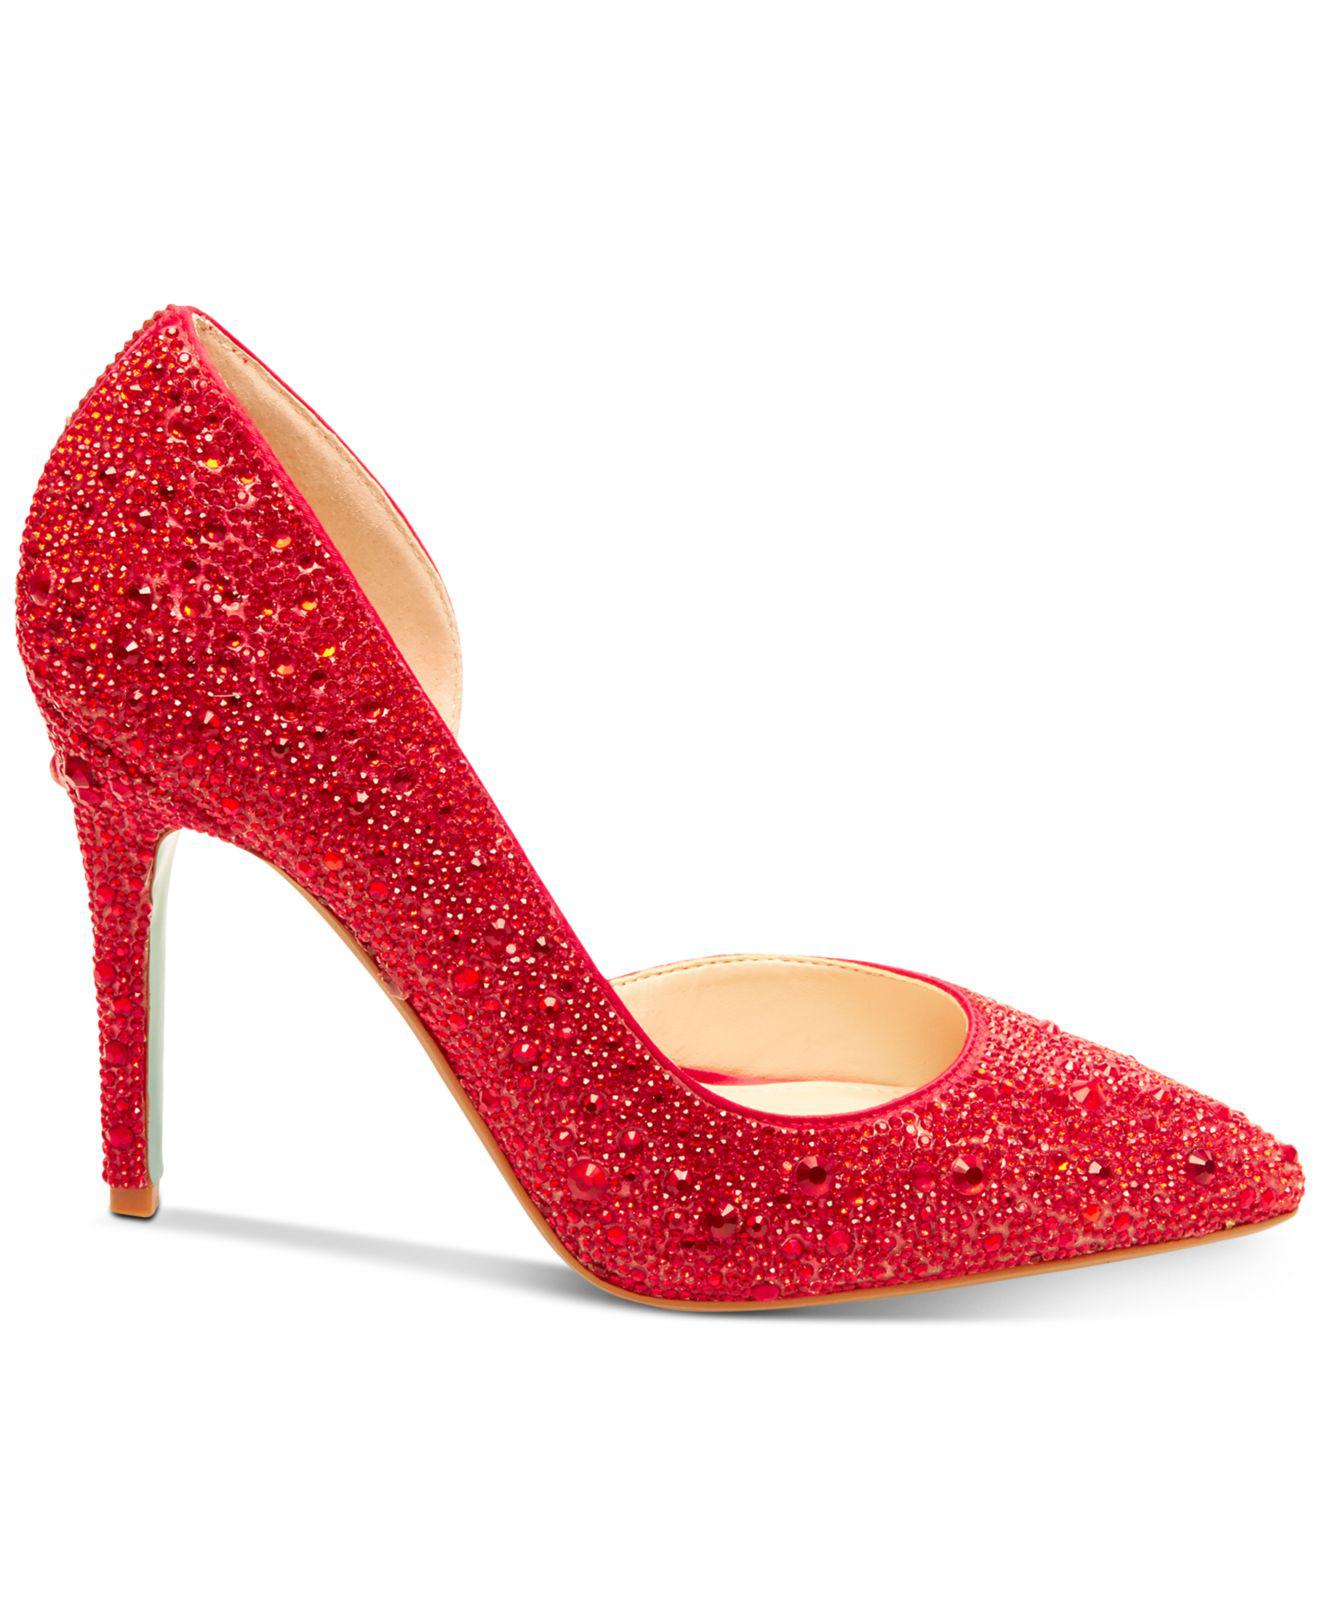 Betsey Johnson Synthetic Hazil Evening Pumps in Red - Lyst